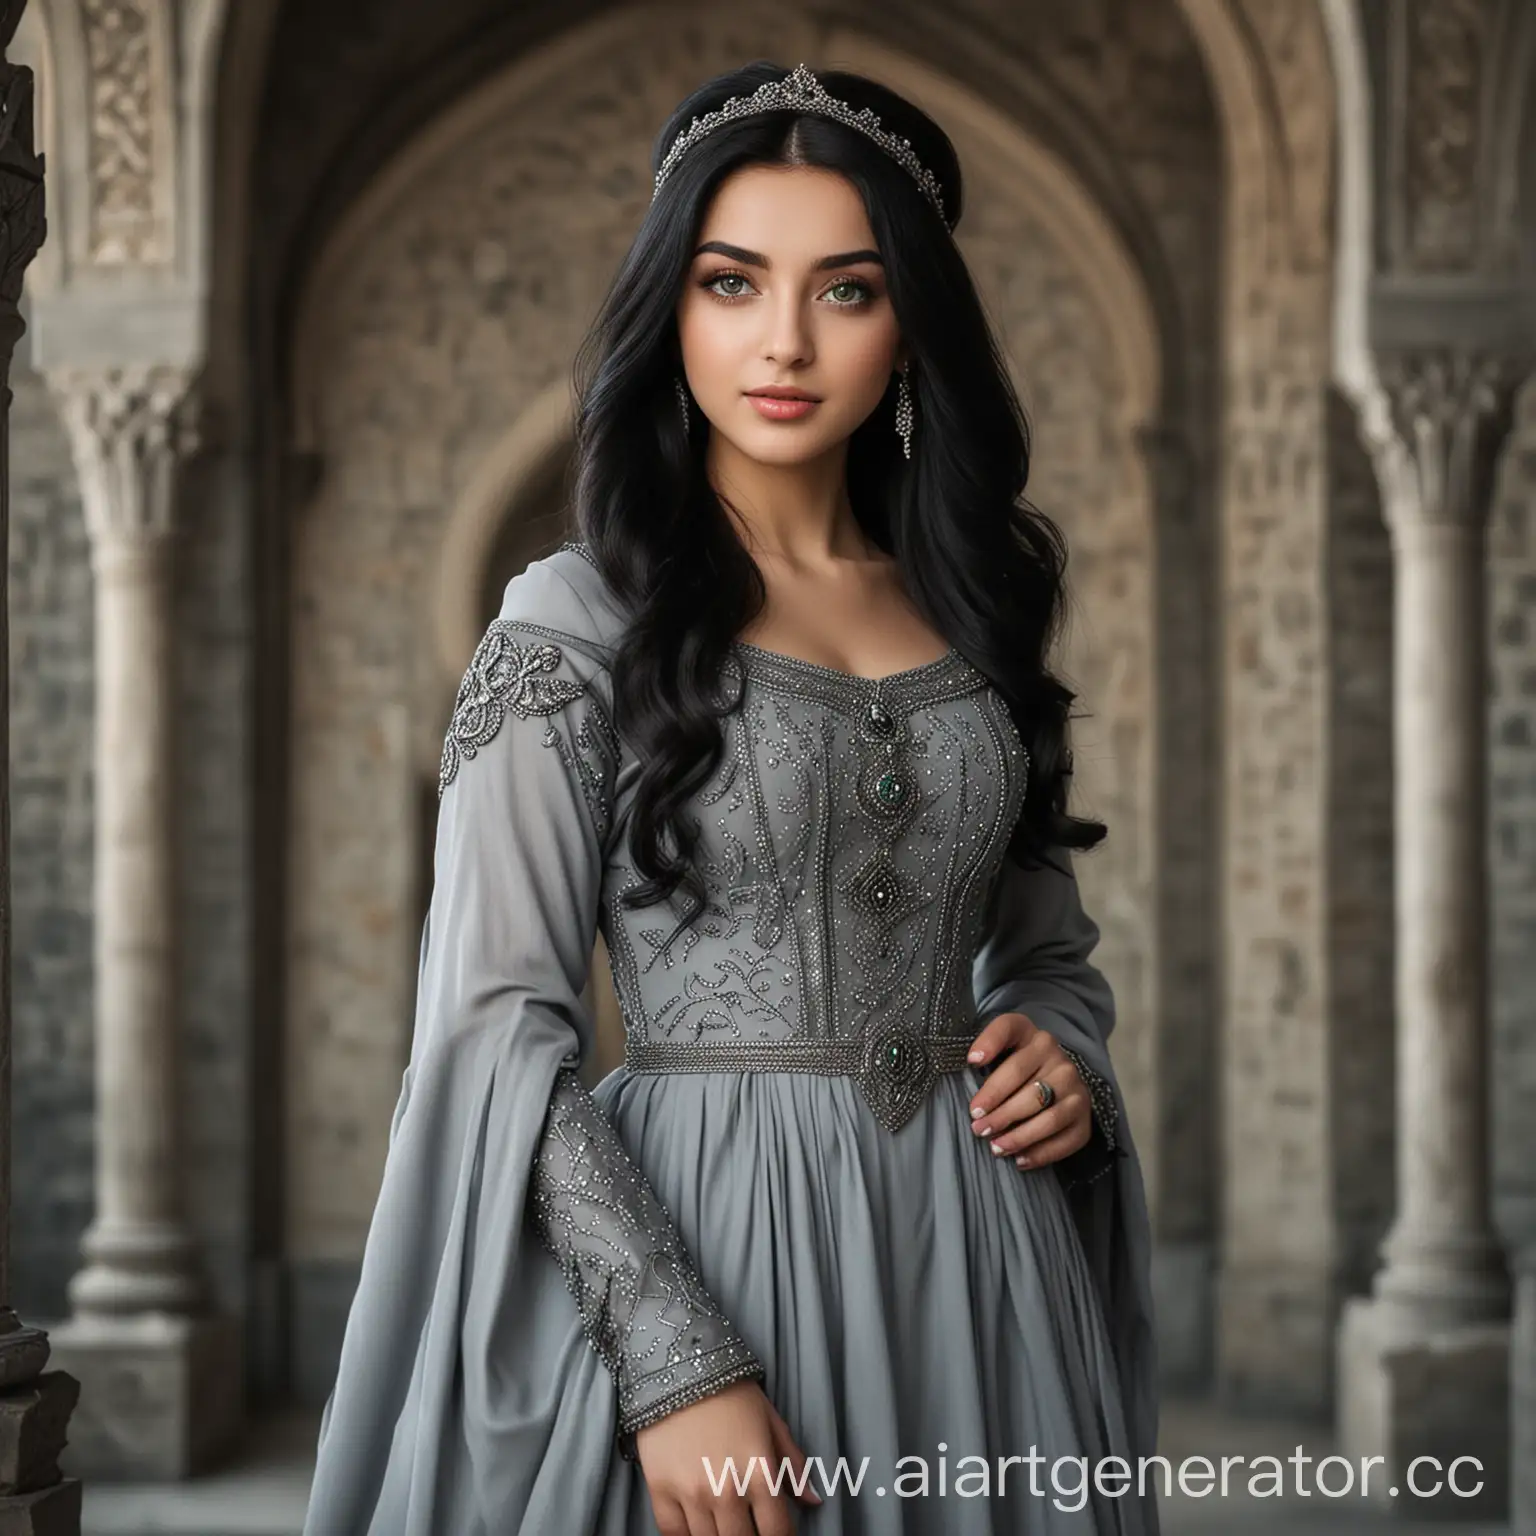 Elegant-High-Middle-Ages-Portrait-of-Nurbana-Sultan-in-Gray-Dress-with-Green-Eyes